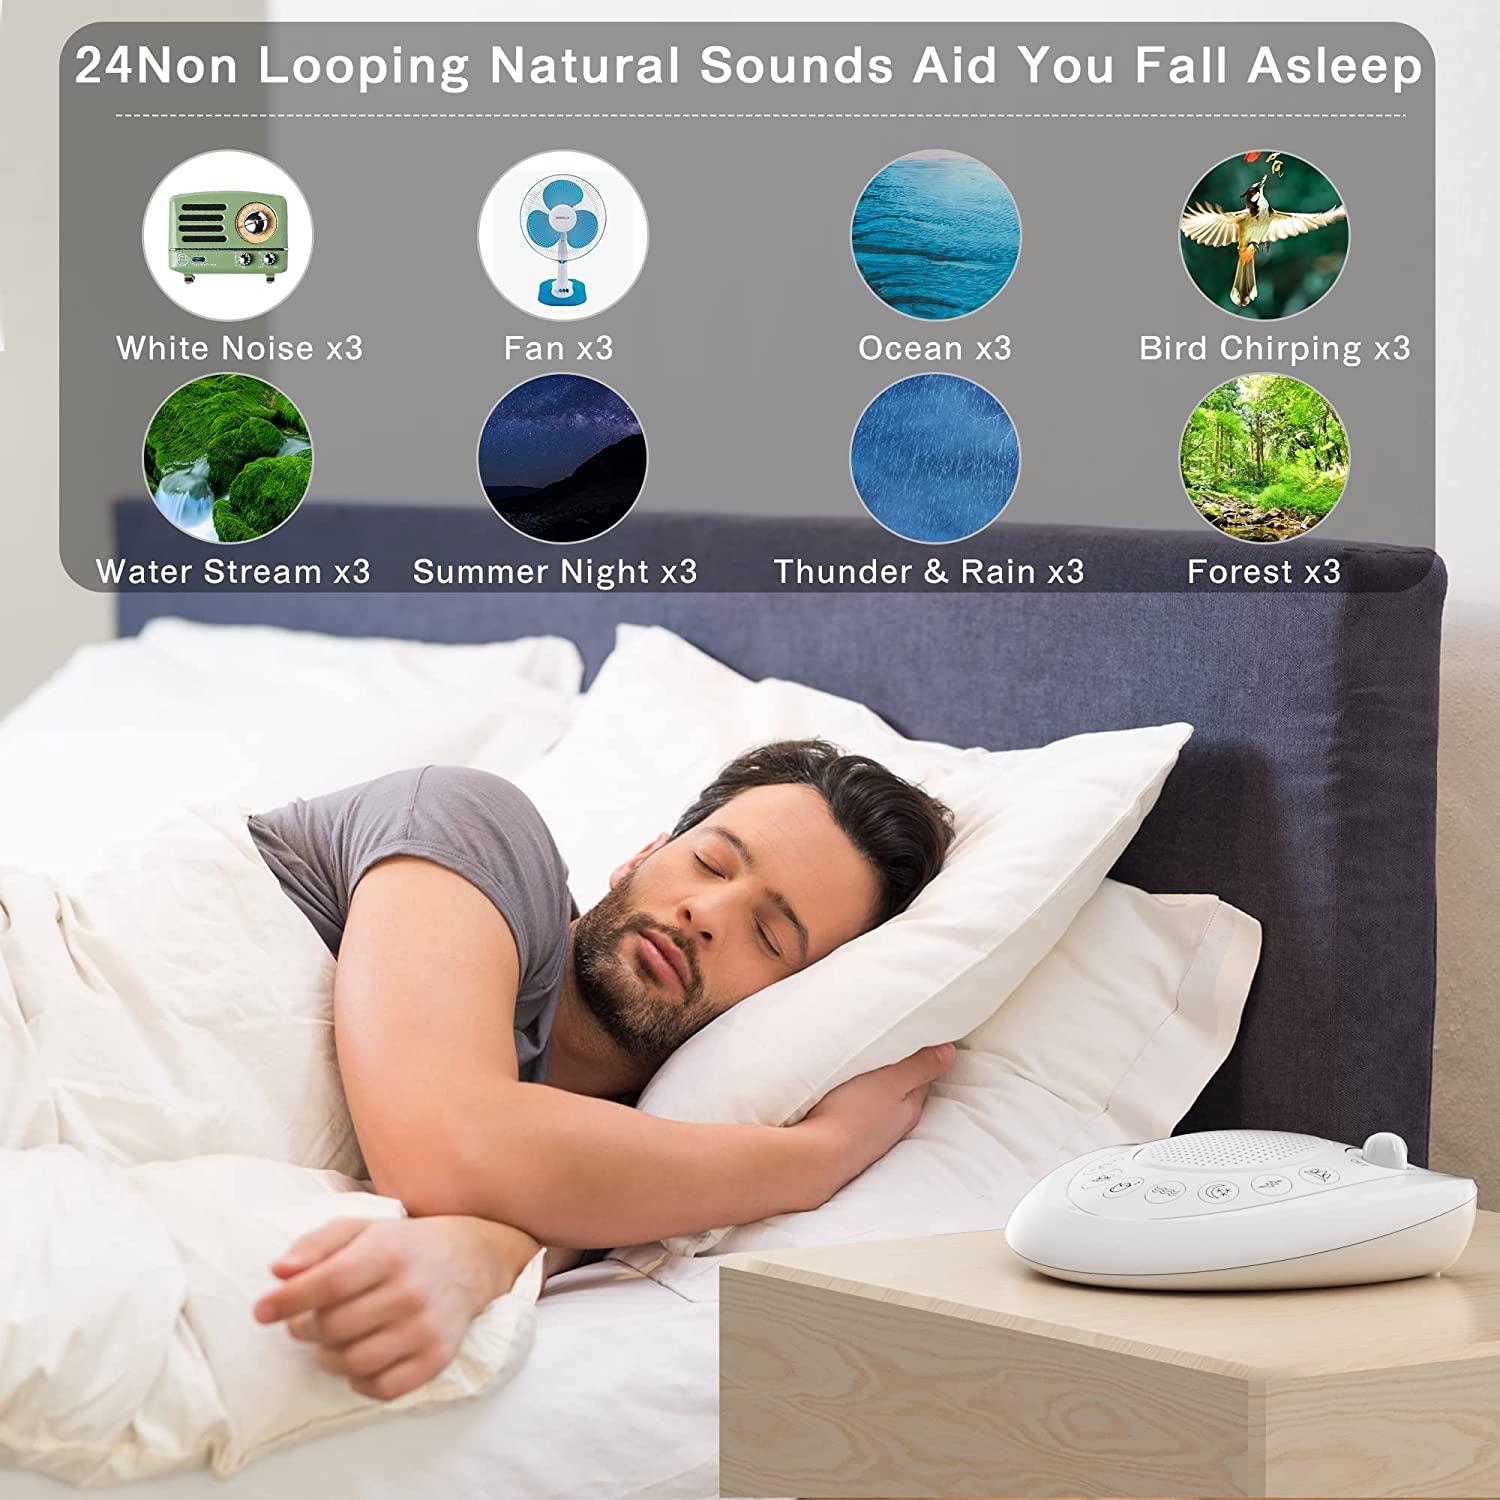 Mesqool 24 Non Looping Natural Sound Machine | White Noise Machine |  Portable Sleep Therapy,Electric/Battery Powered,3 Auto-Off Timer,Headphone